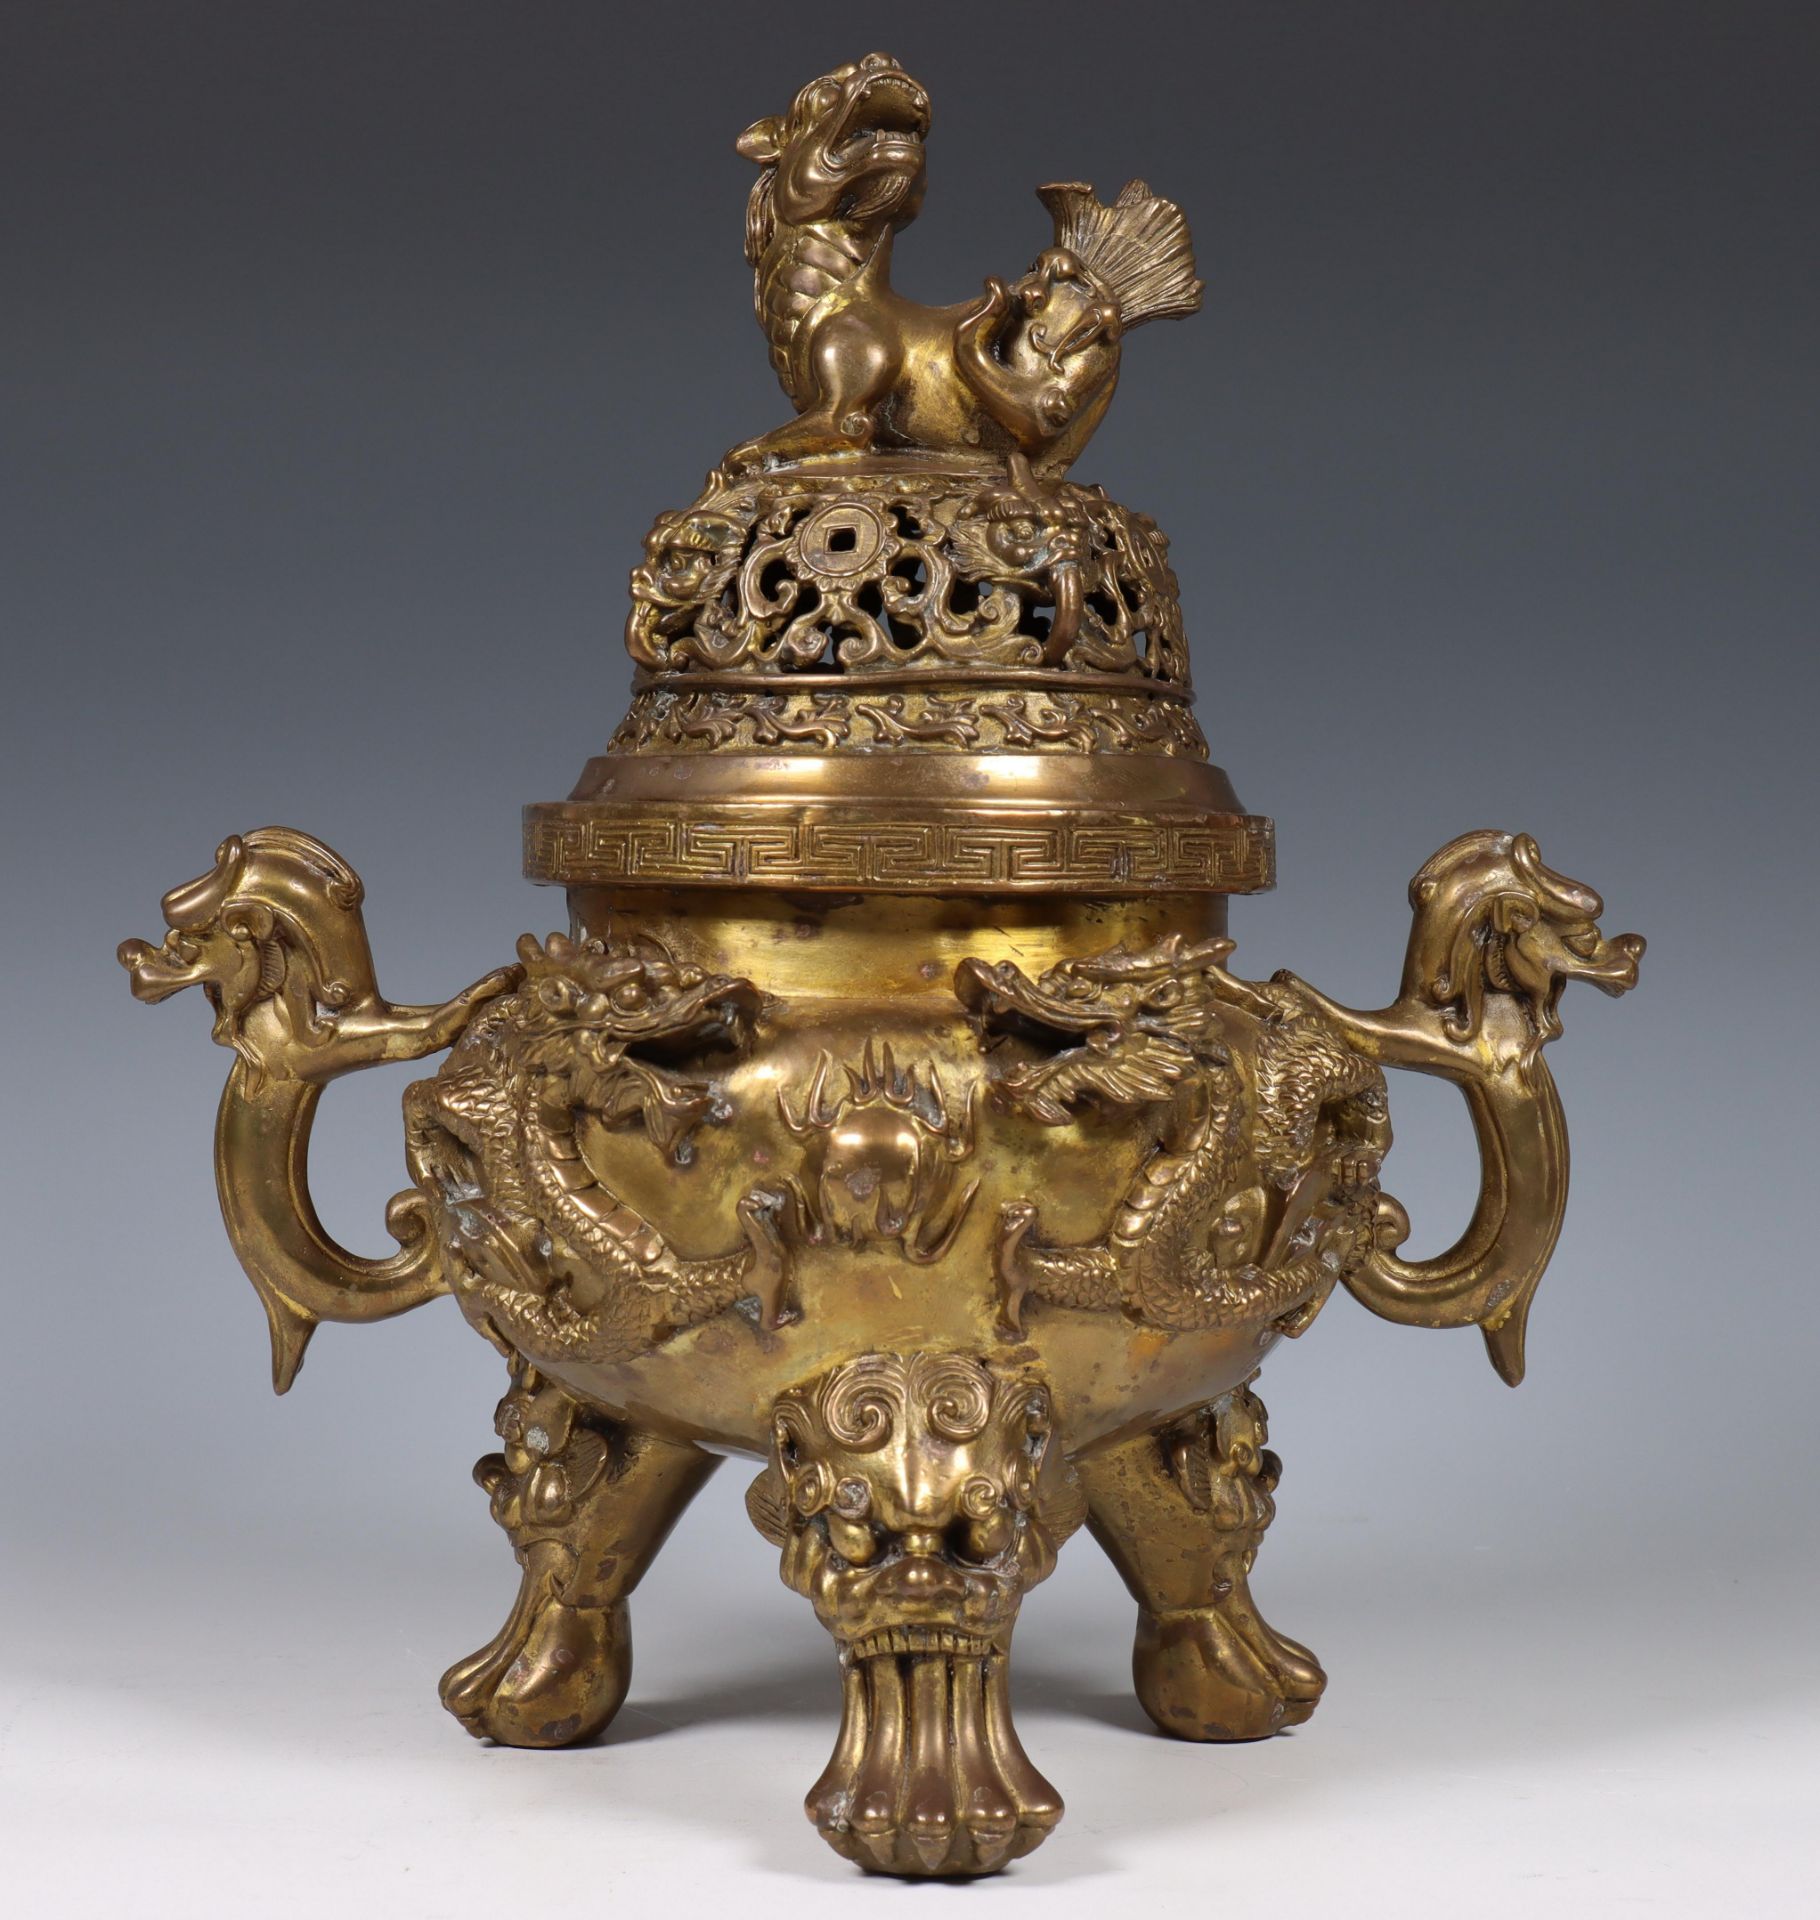 China, bronze censer and cover and copper alloy inkset, 20th century, the censer modelled with